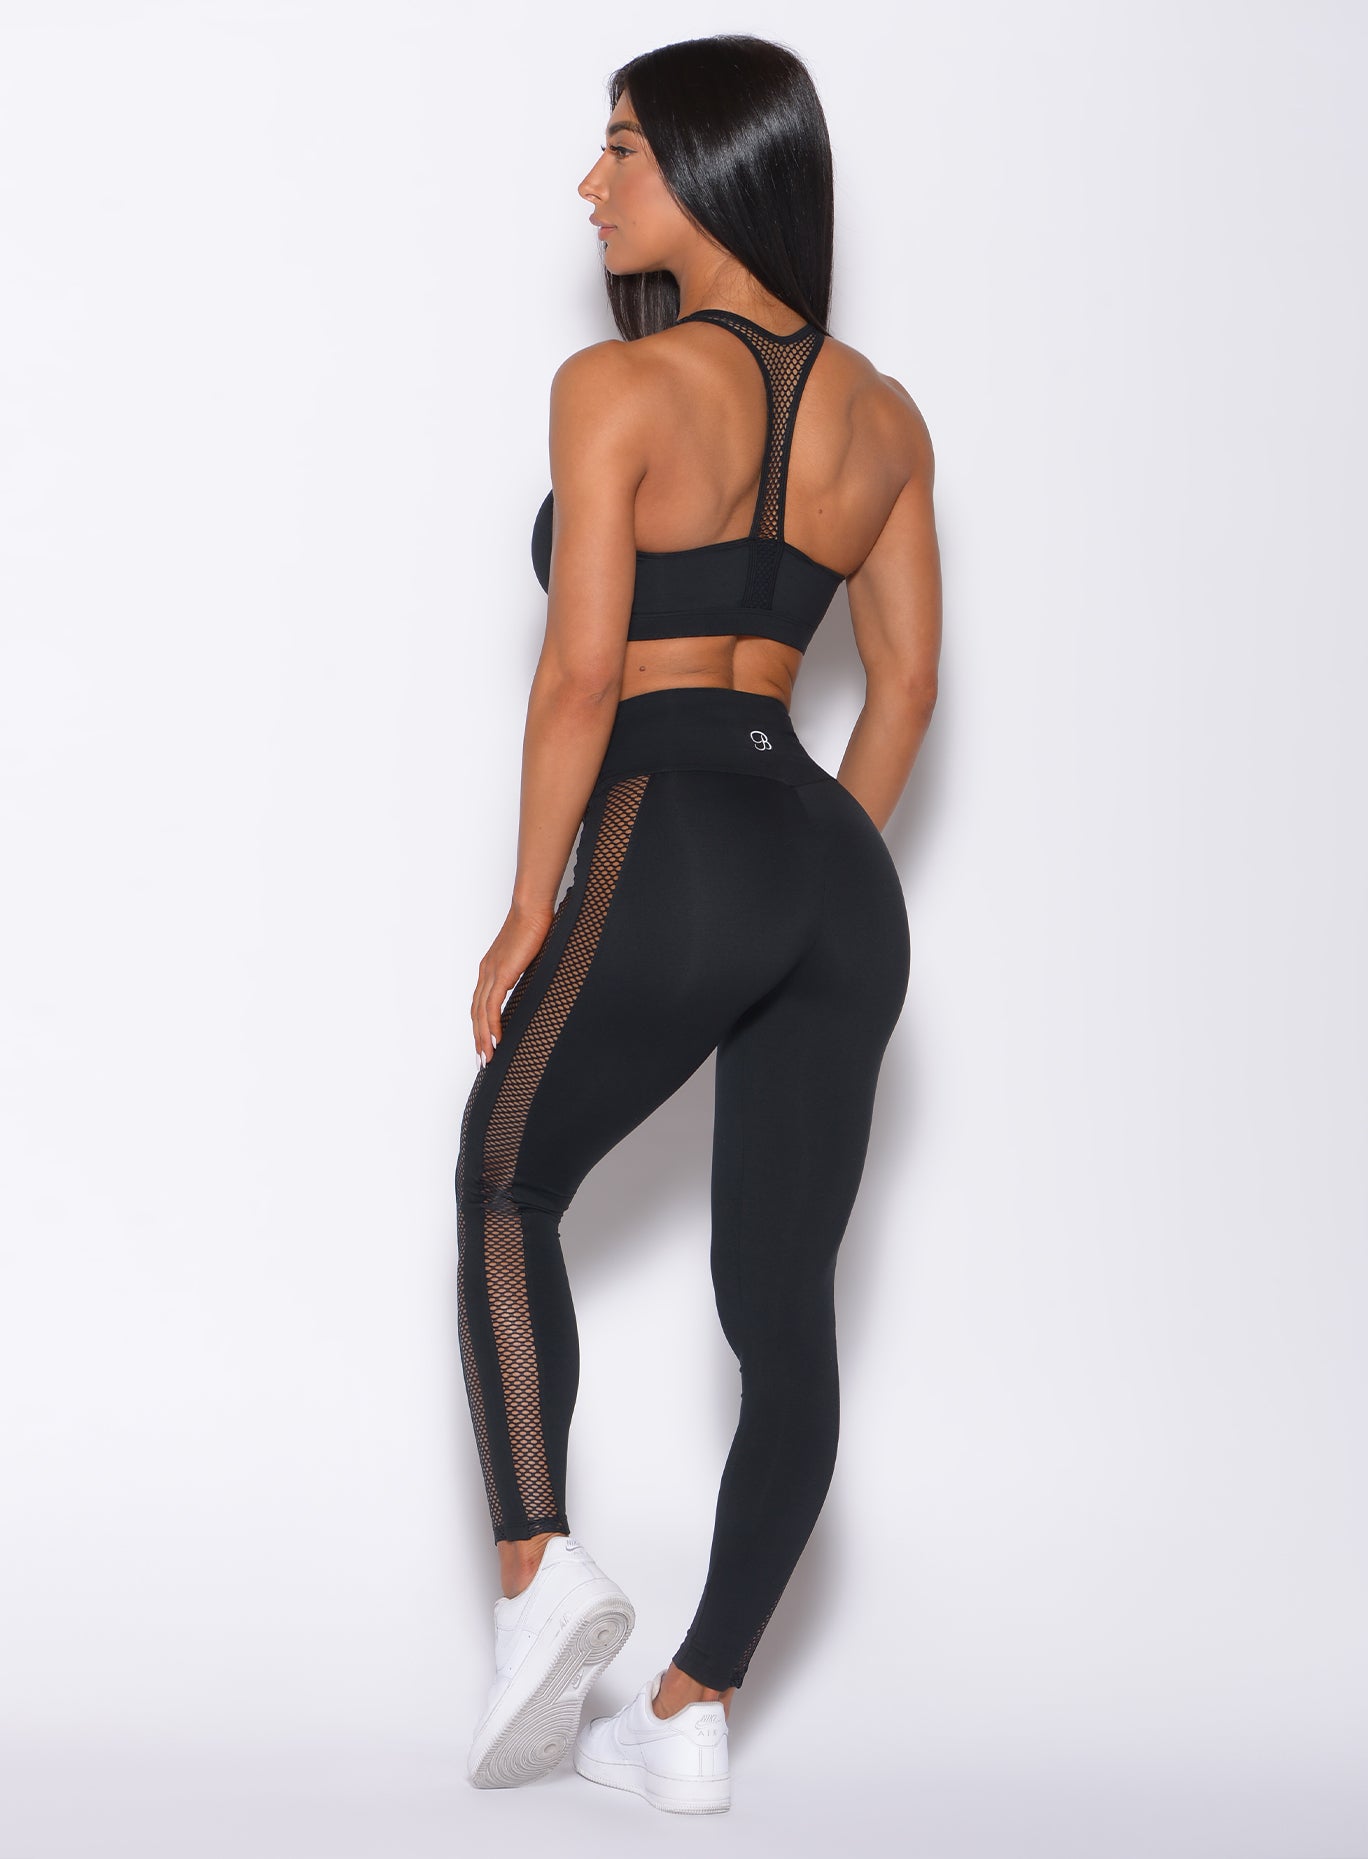 Back profile view of a model facing to her left wearing our black Mohawk leggings and a matching bra